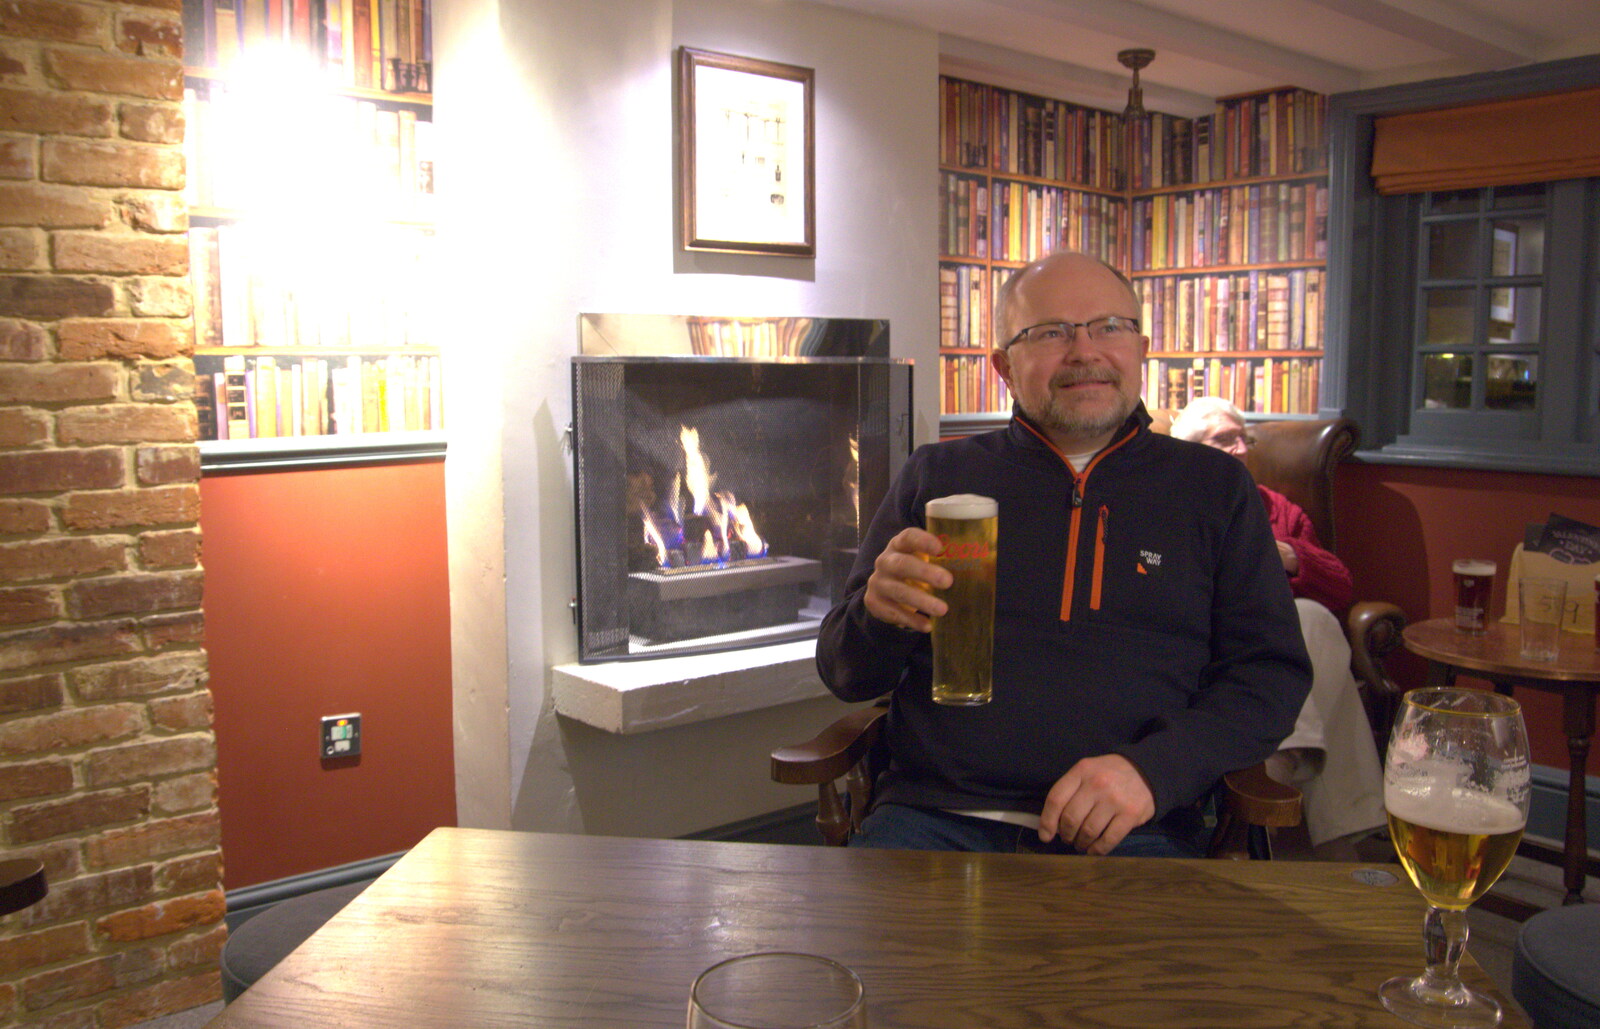 Hamish in the Globe at Highcliffe from A Wintry Trip Down South, Walkford, Dorset - 1st February 2019